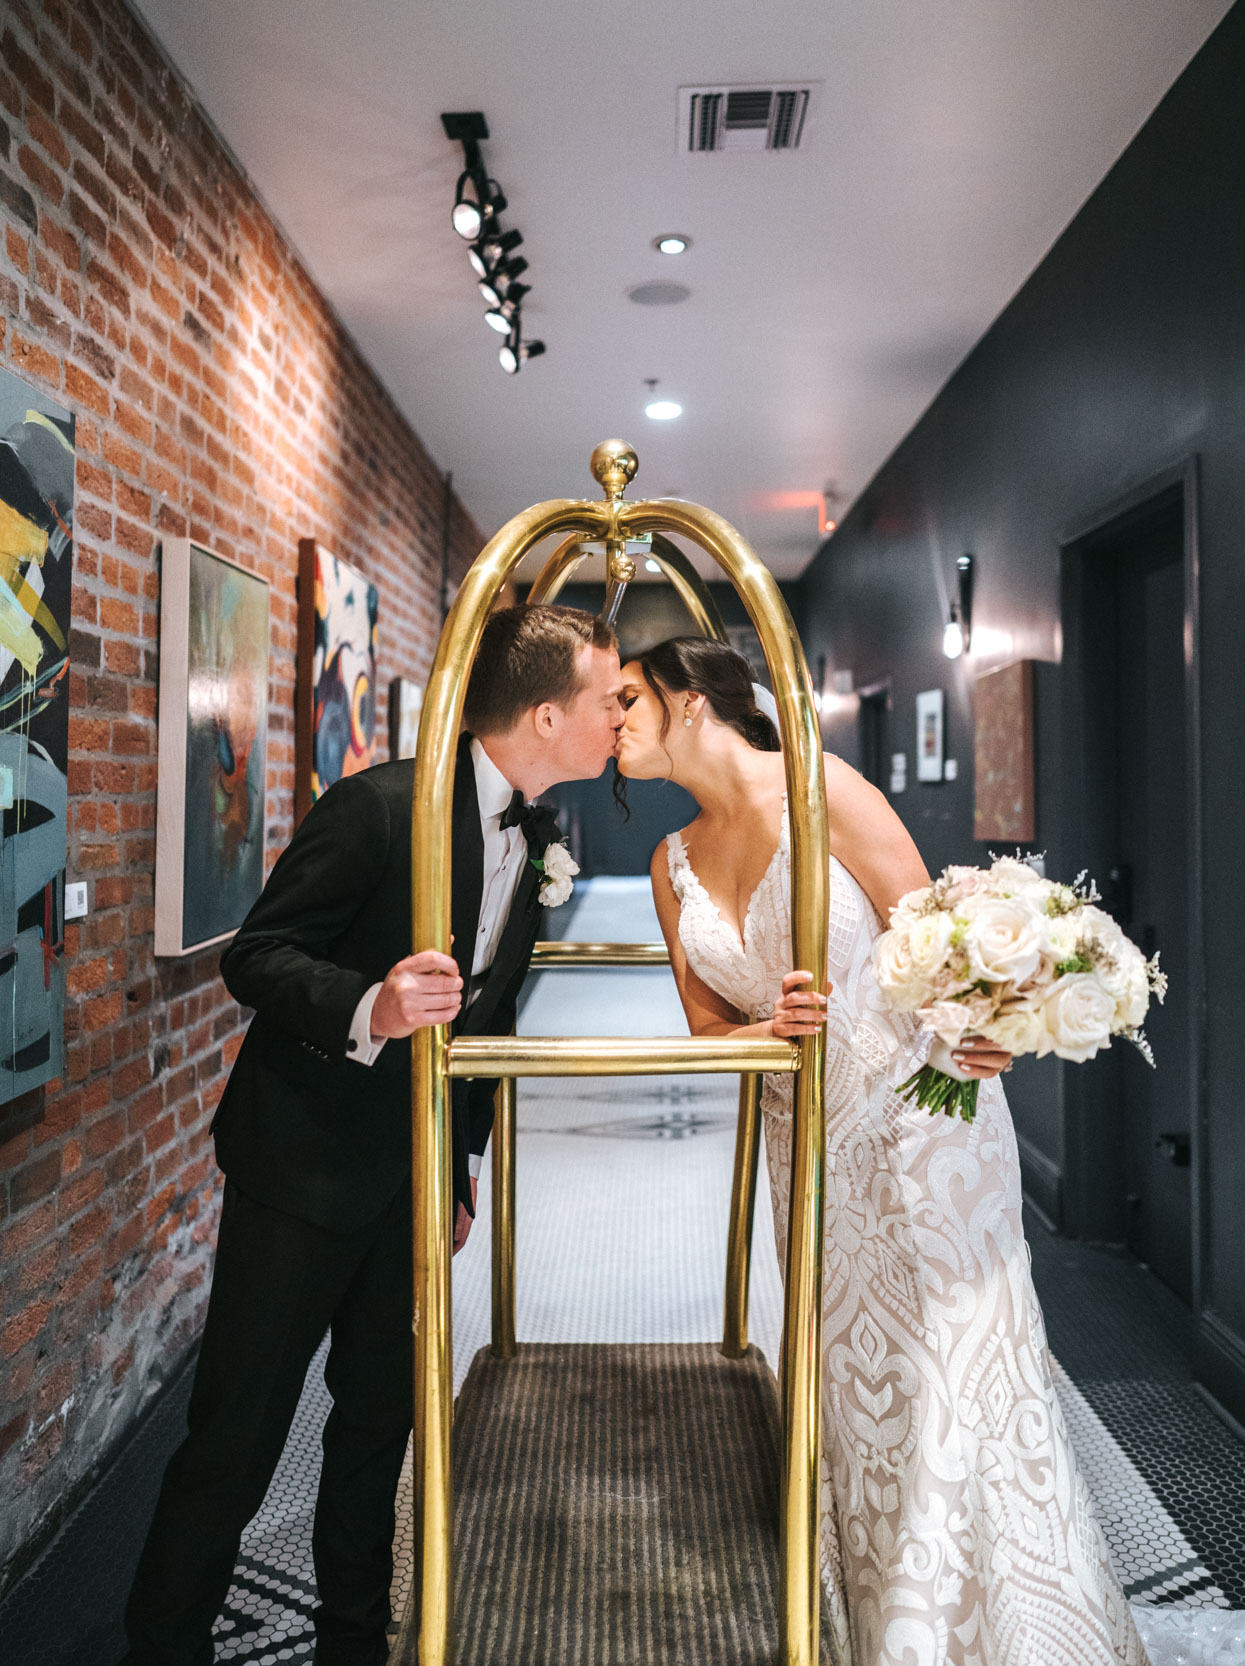 Bride and groom kissing over luggage rack at the Old 77 Hotel in New Orleans